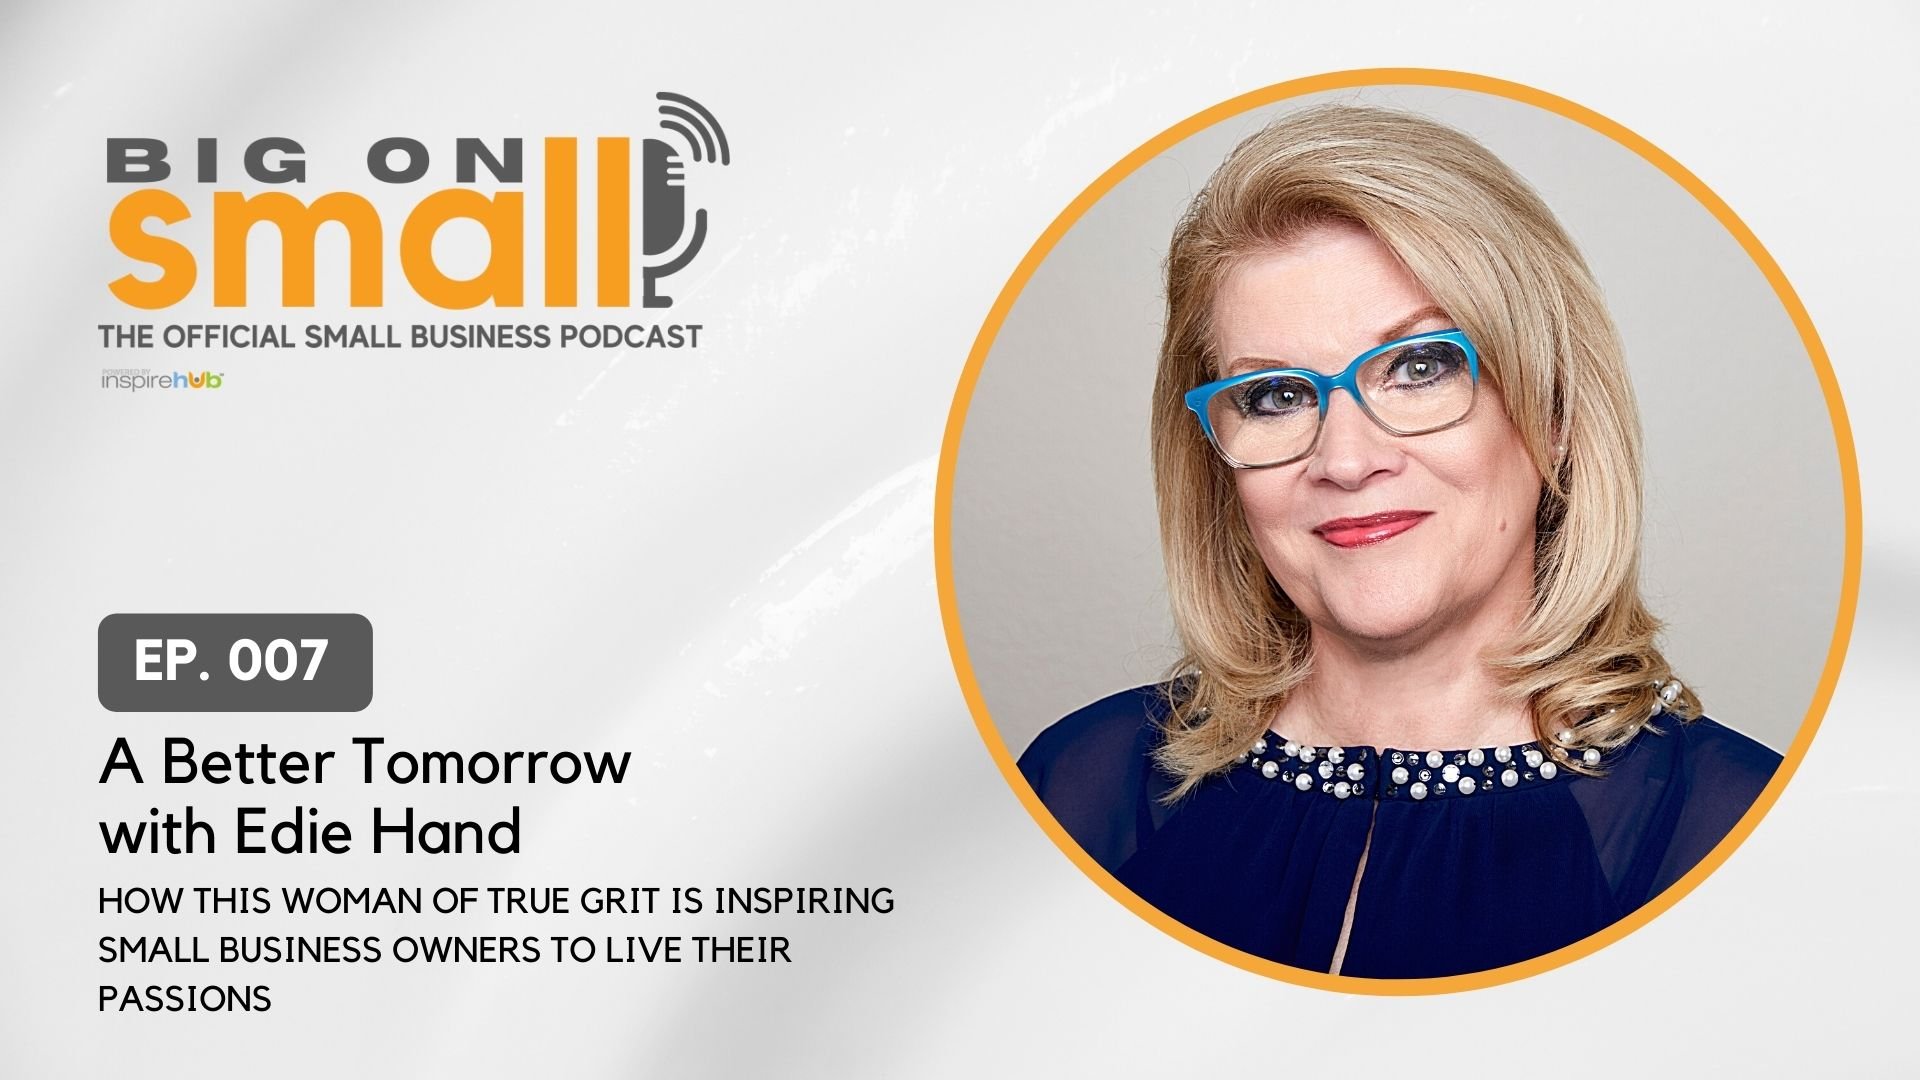 Edie Hand knows a thing or two about small businesses and true grit and shares them in Big on Small podcast episode 7.